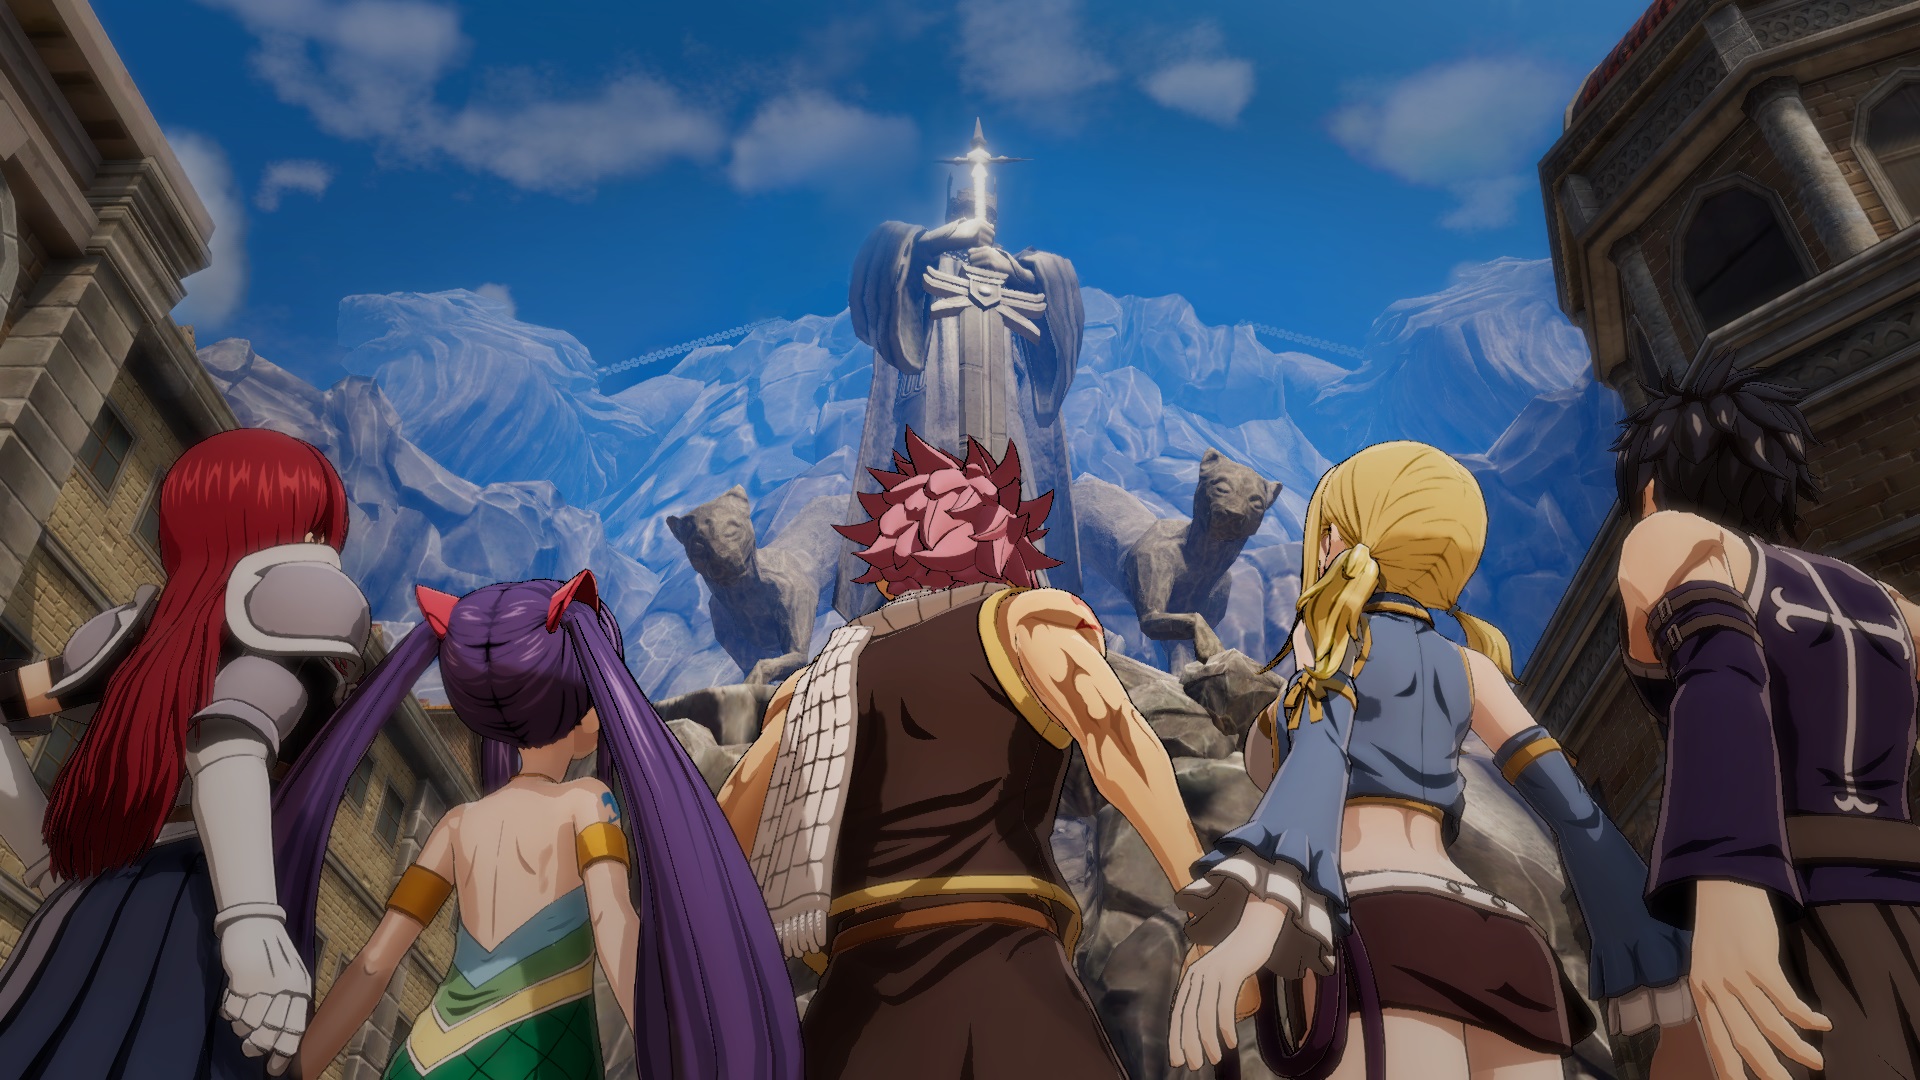 Fairy Tail Online by William_Hatake at BYOND Games